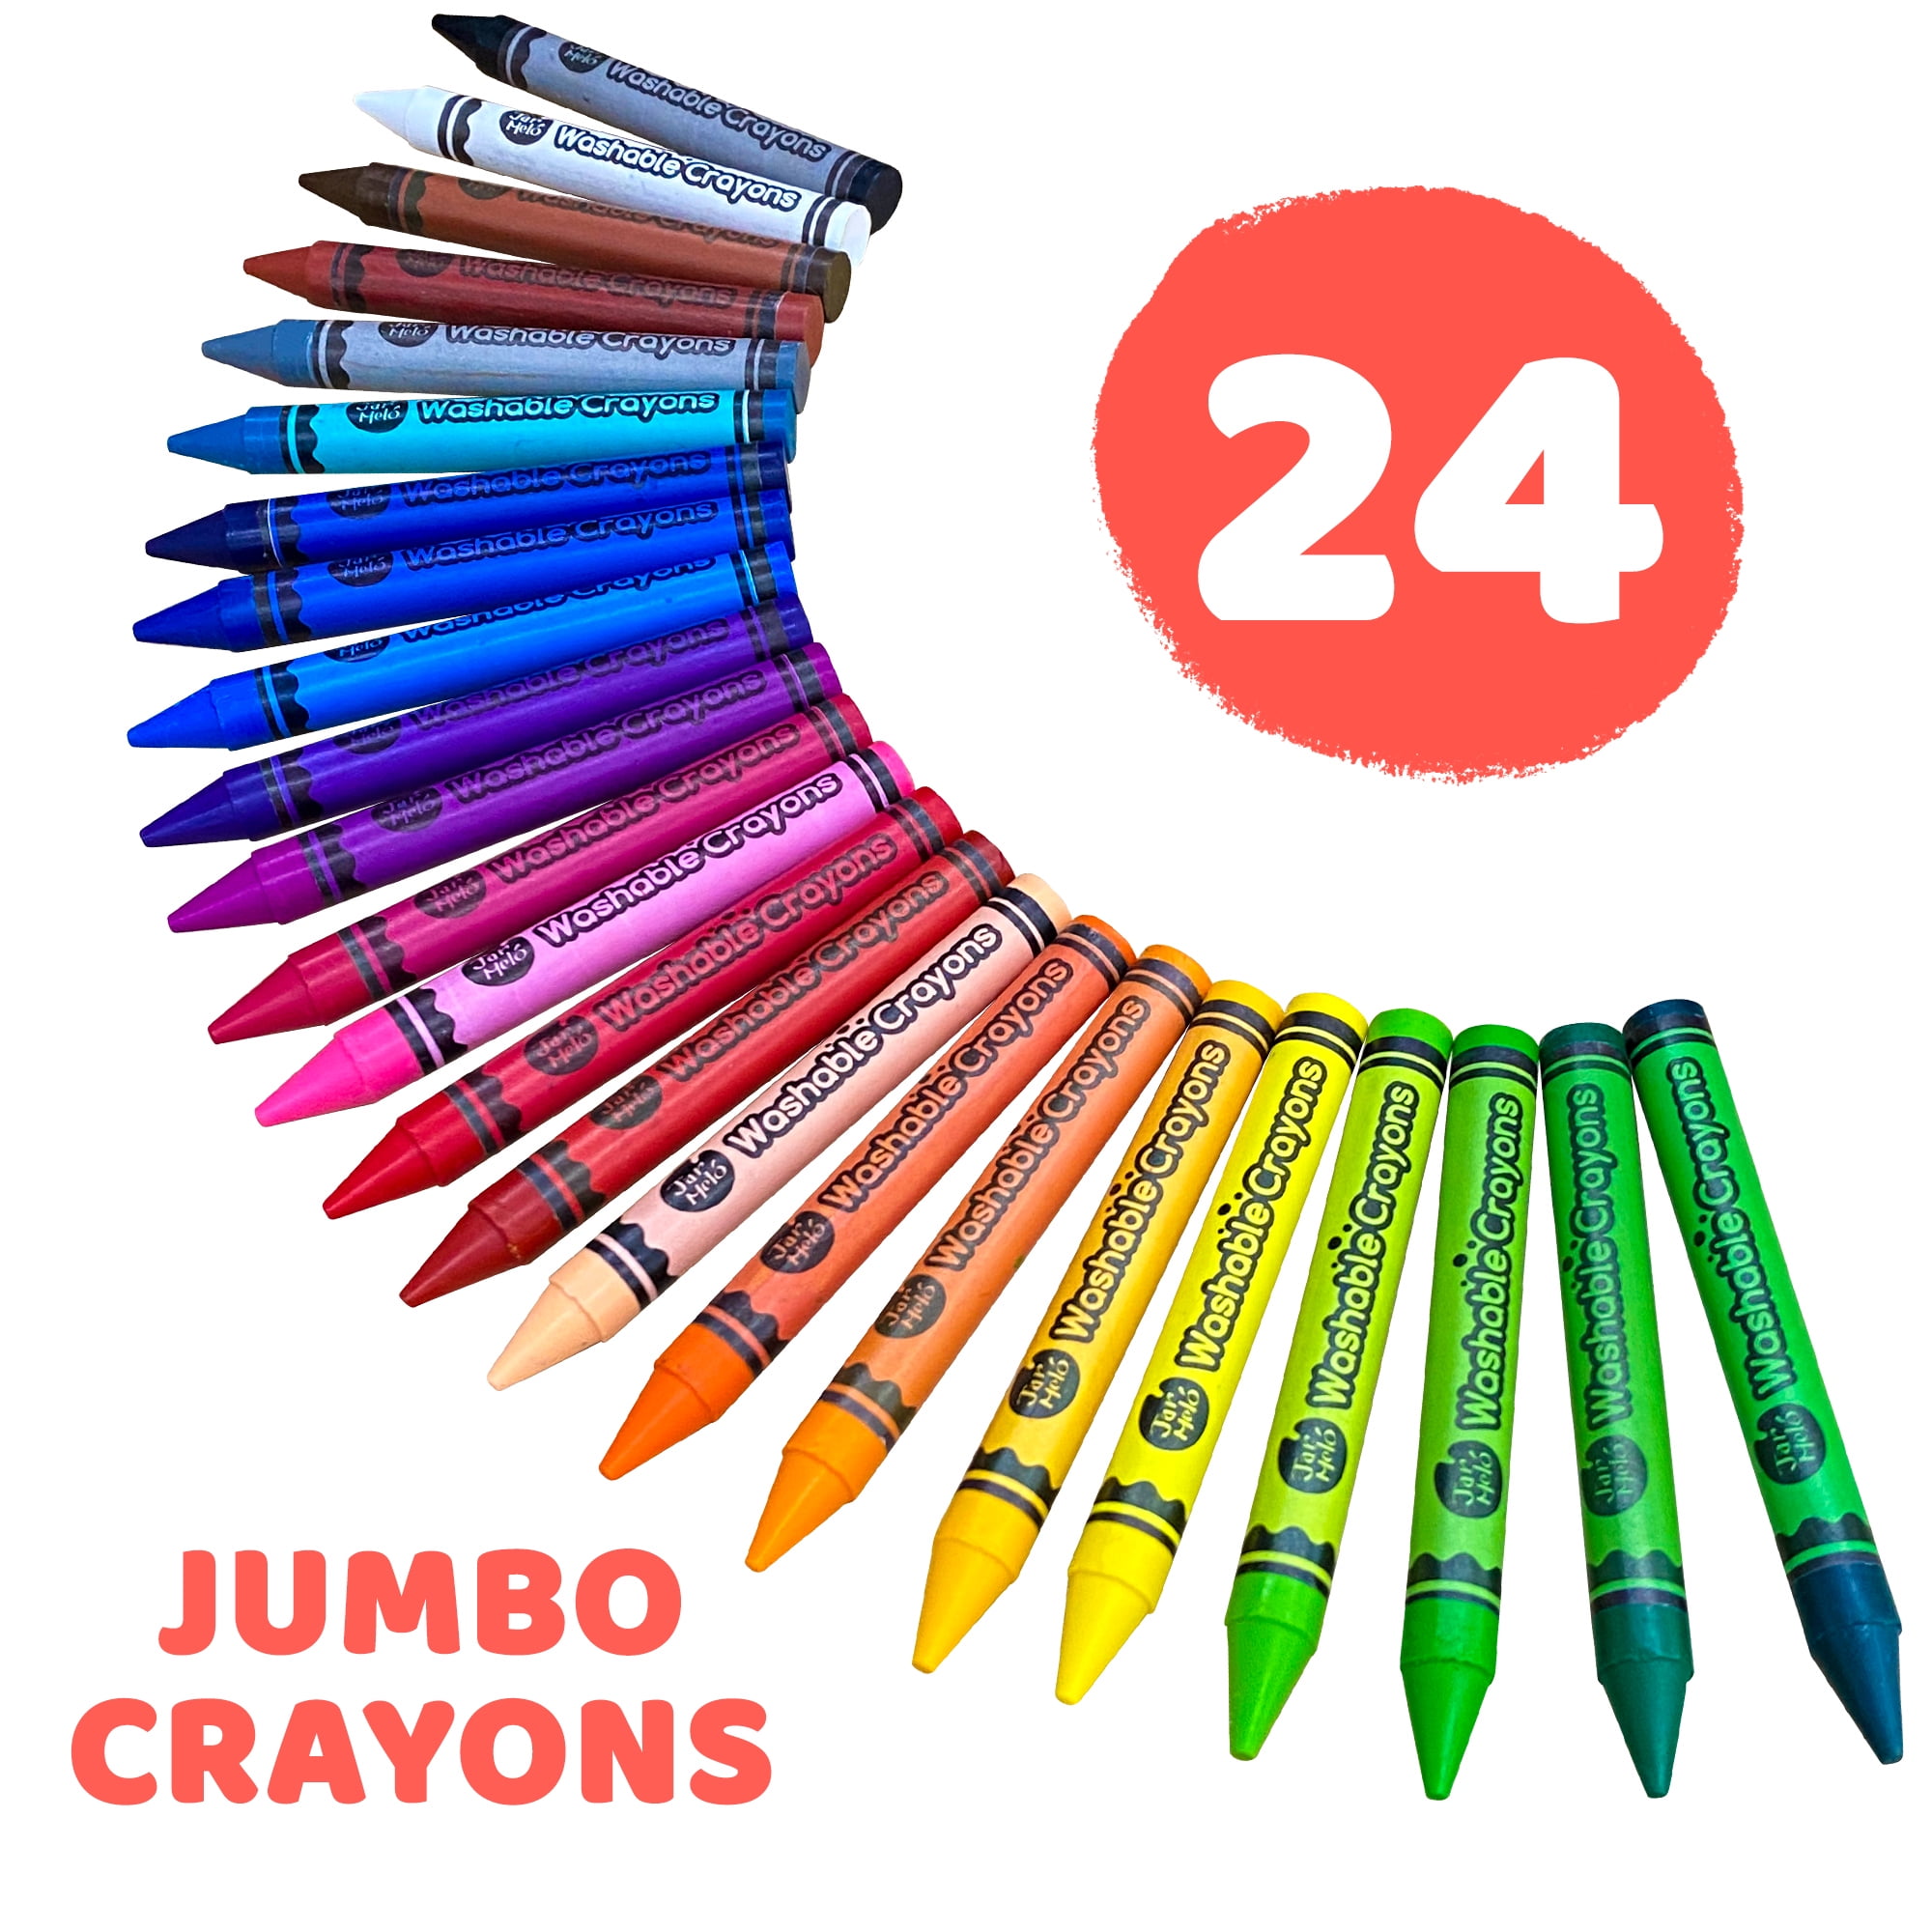  Jar Melo Jumbo Crayons for Toddlers, 12 Colors 99